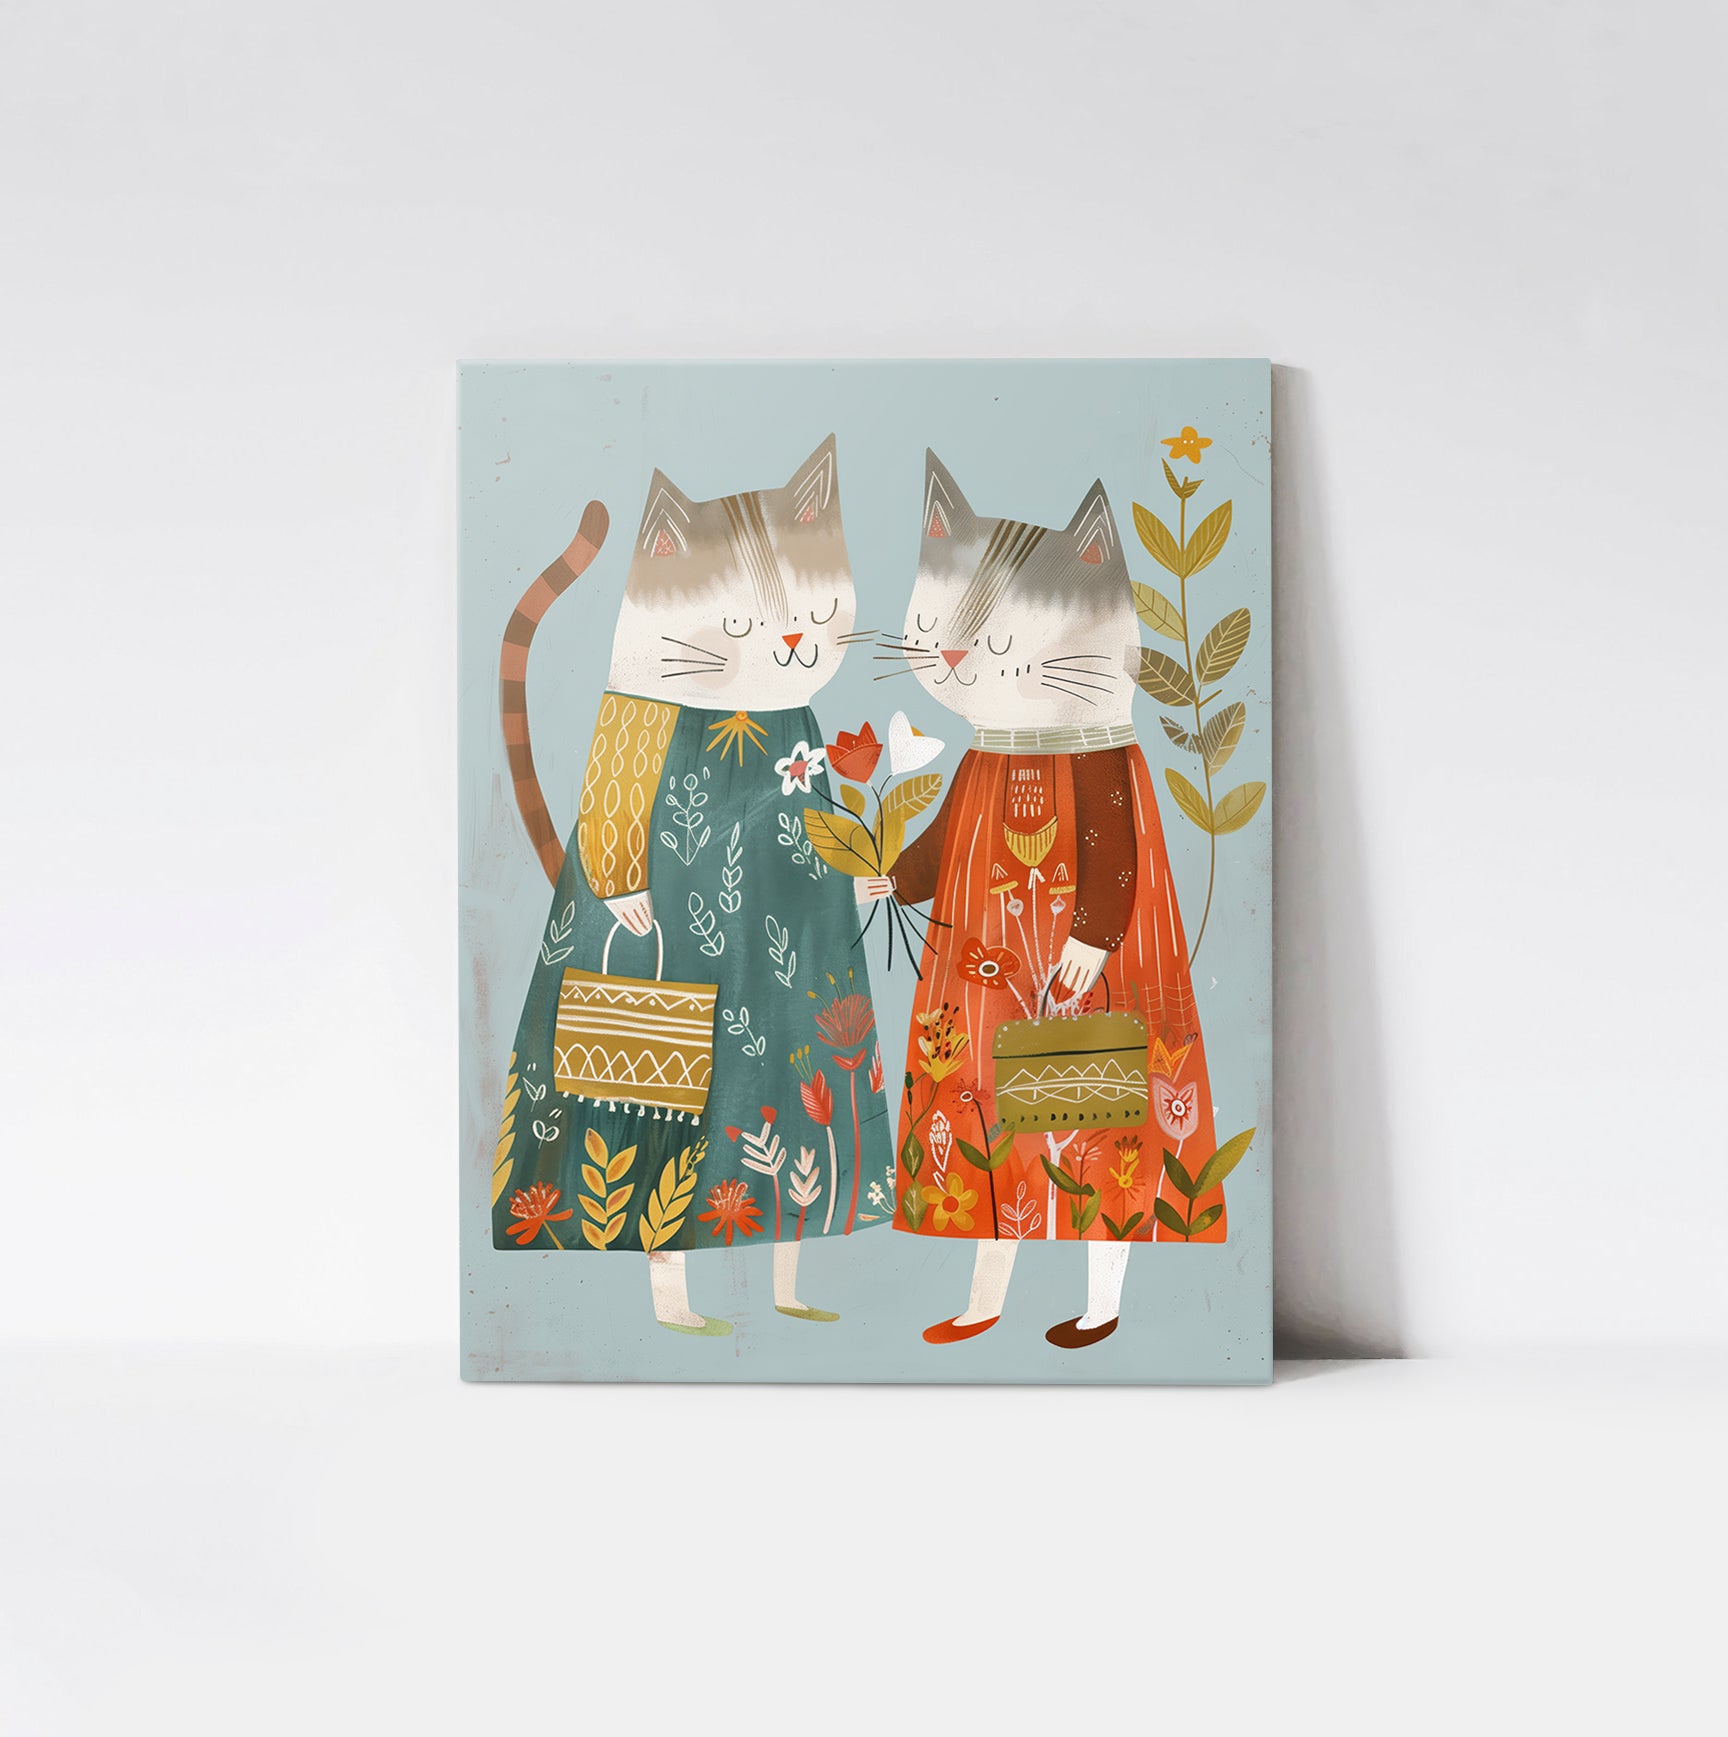 Art print of two cats in floral dresses on a wood board, perfect for nursery or kids' room decoration with a playful and charming design.